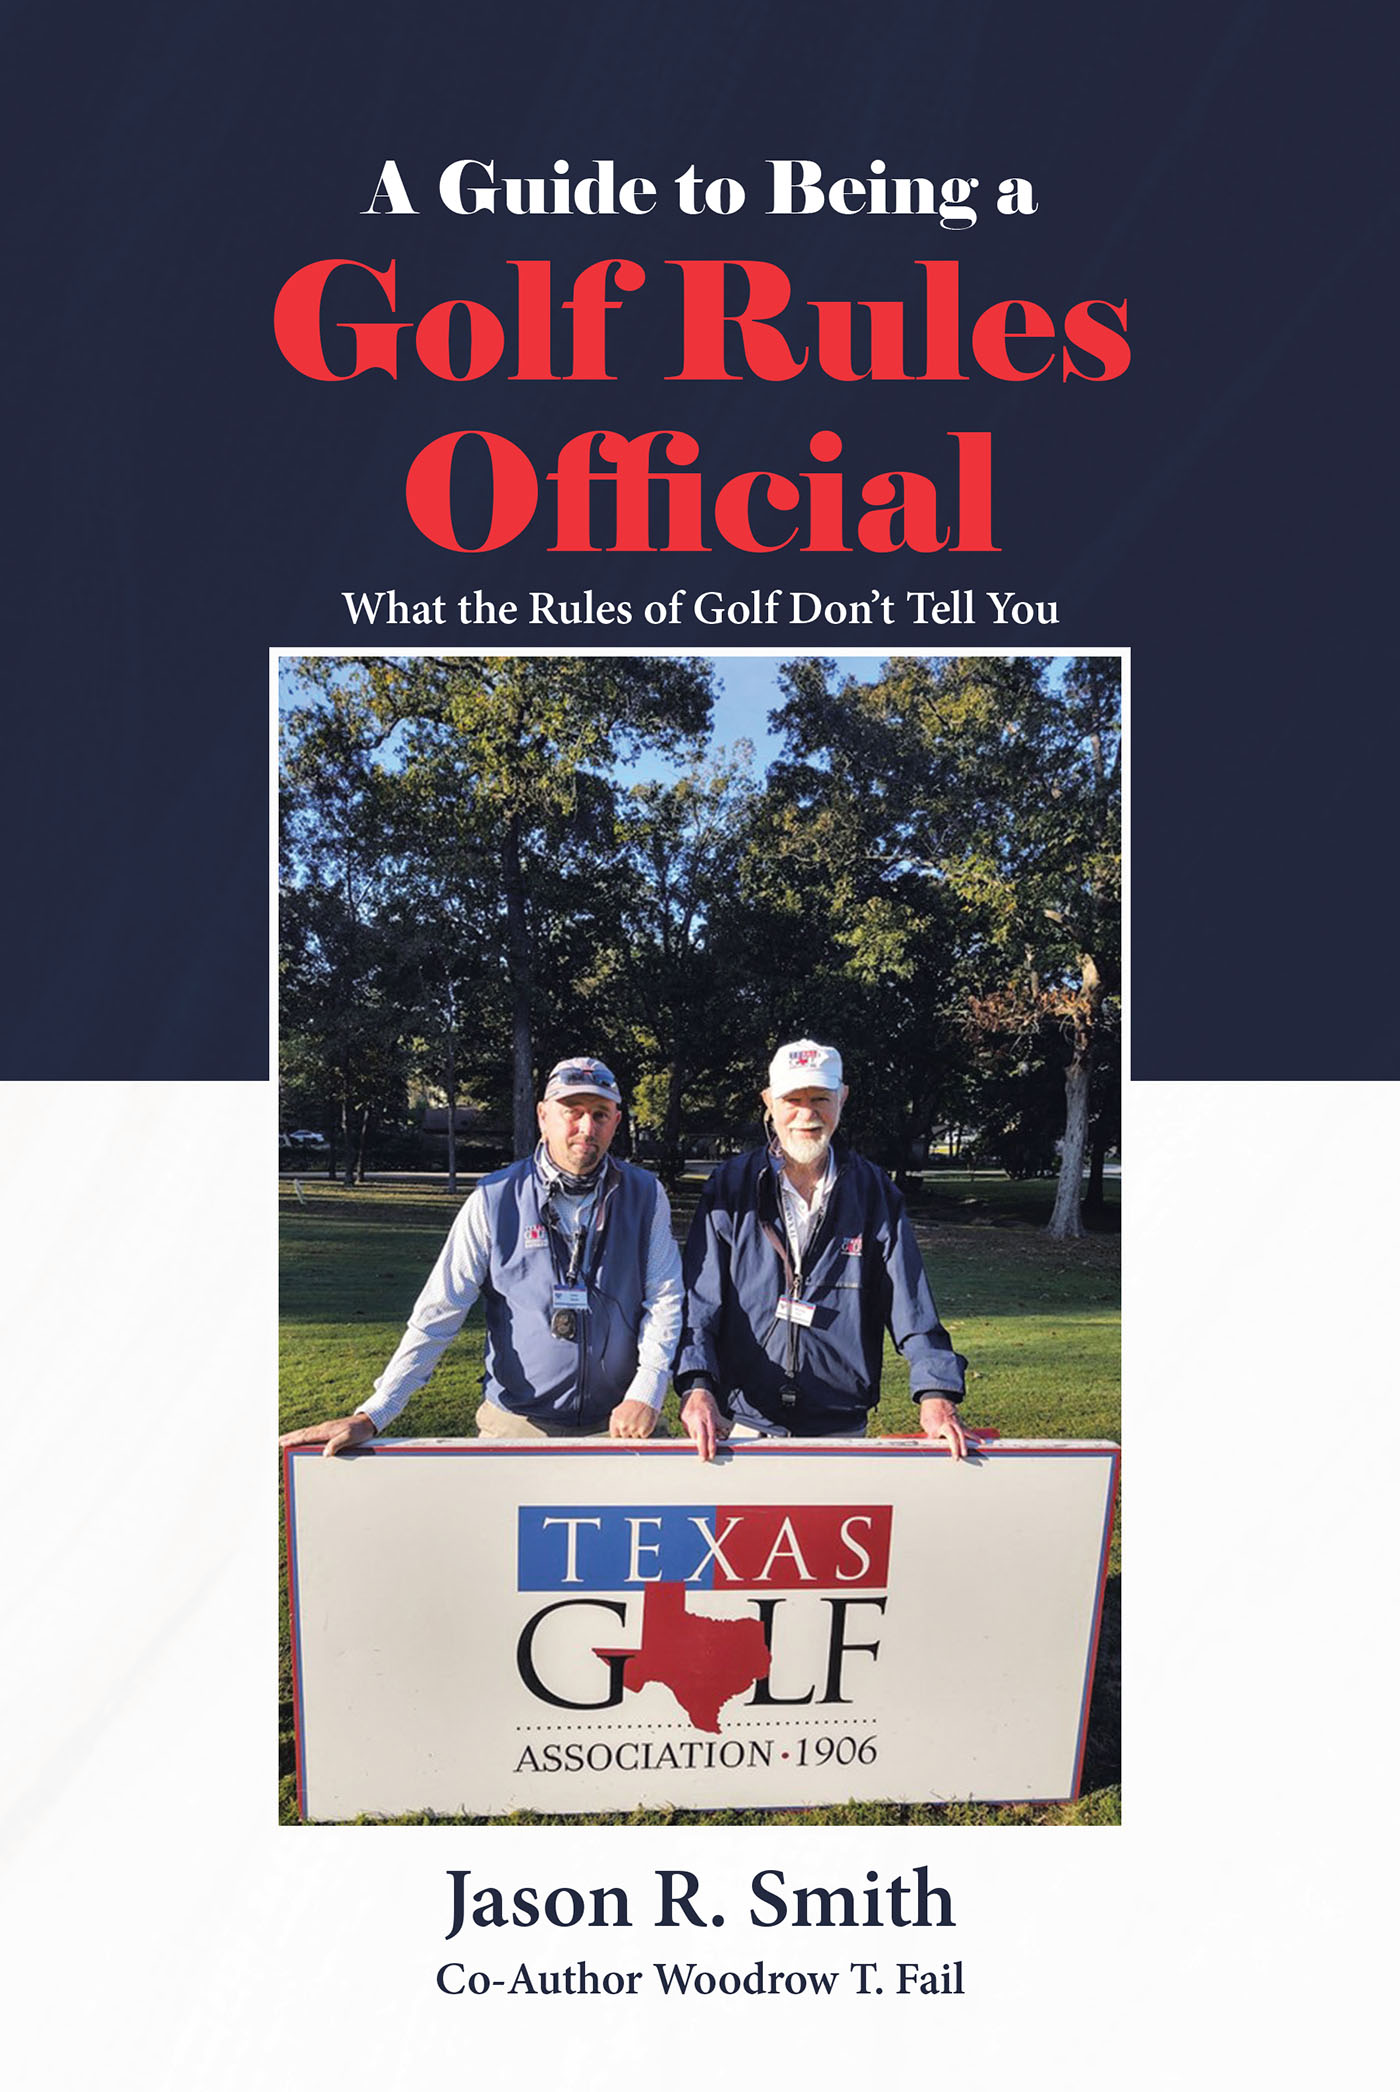 Jason R. Smith & Woodrow T. Fail’s New Book, "A Guide to Being a Golf Rules Official," is an Instructive & Comprehensive Look at What It Takes to Become a Golf Referee